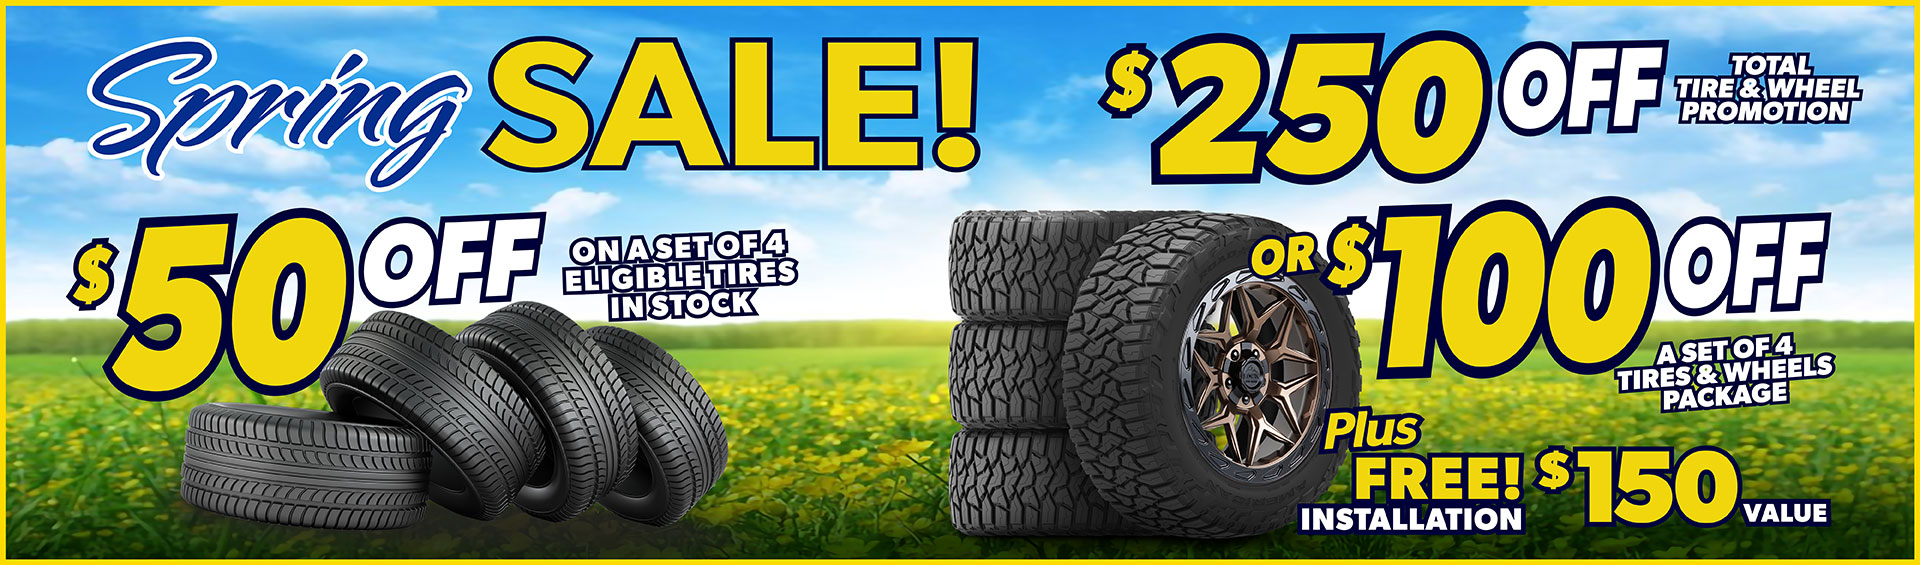 March Madness Tire Sale! Slam Dunk Savings Await. at Tire Outlet US Fullerton